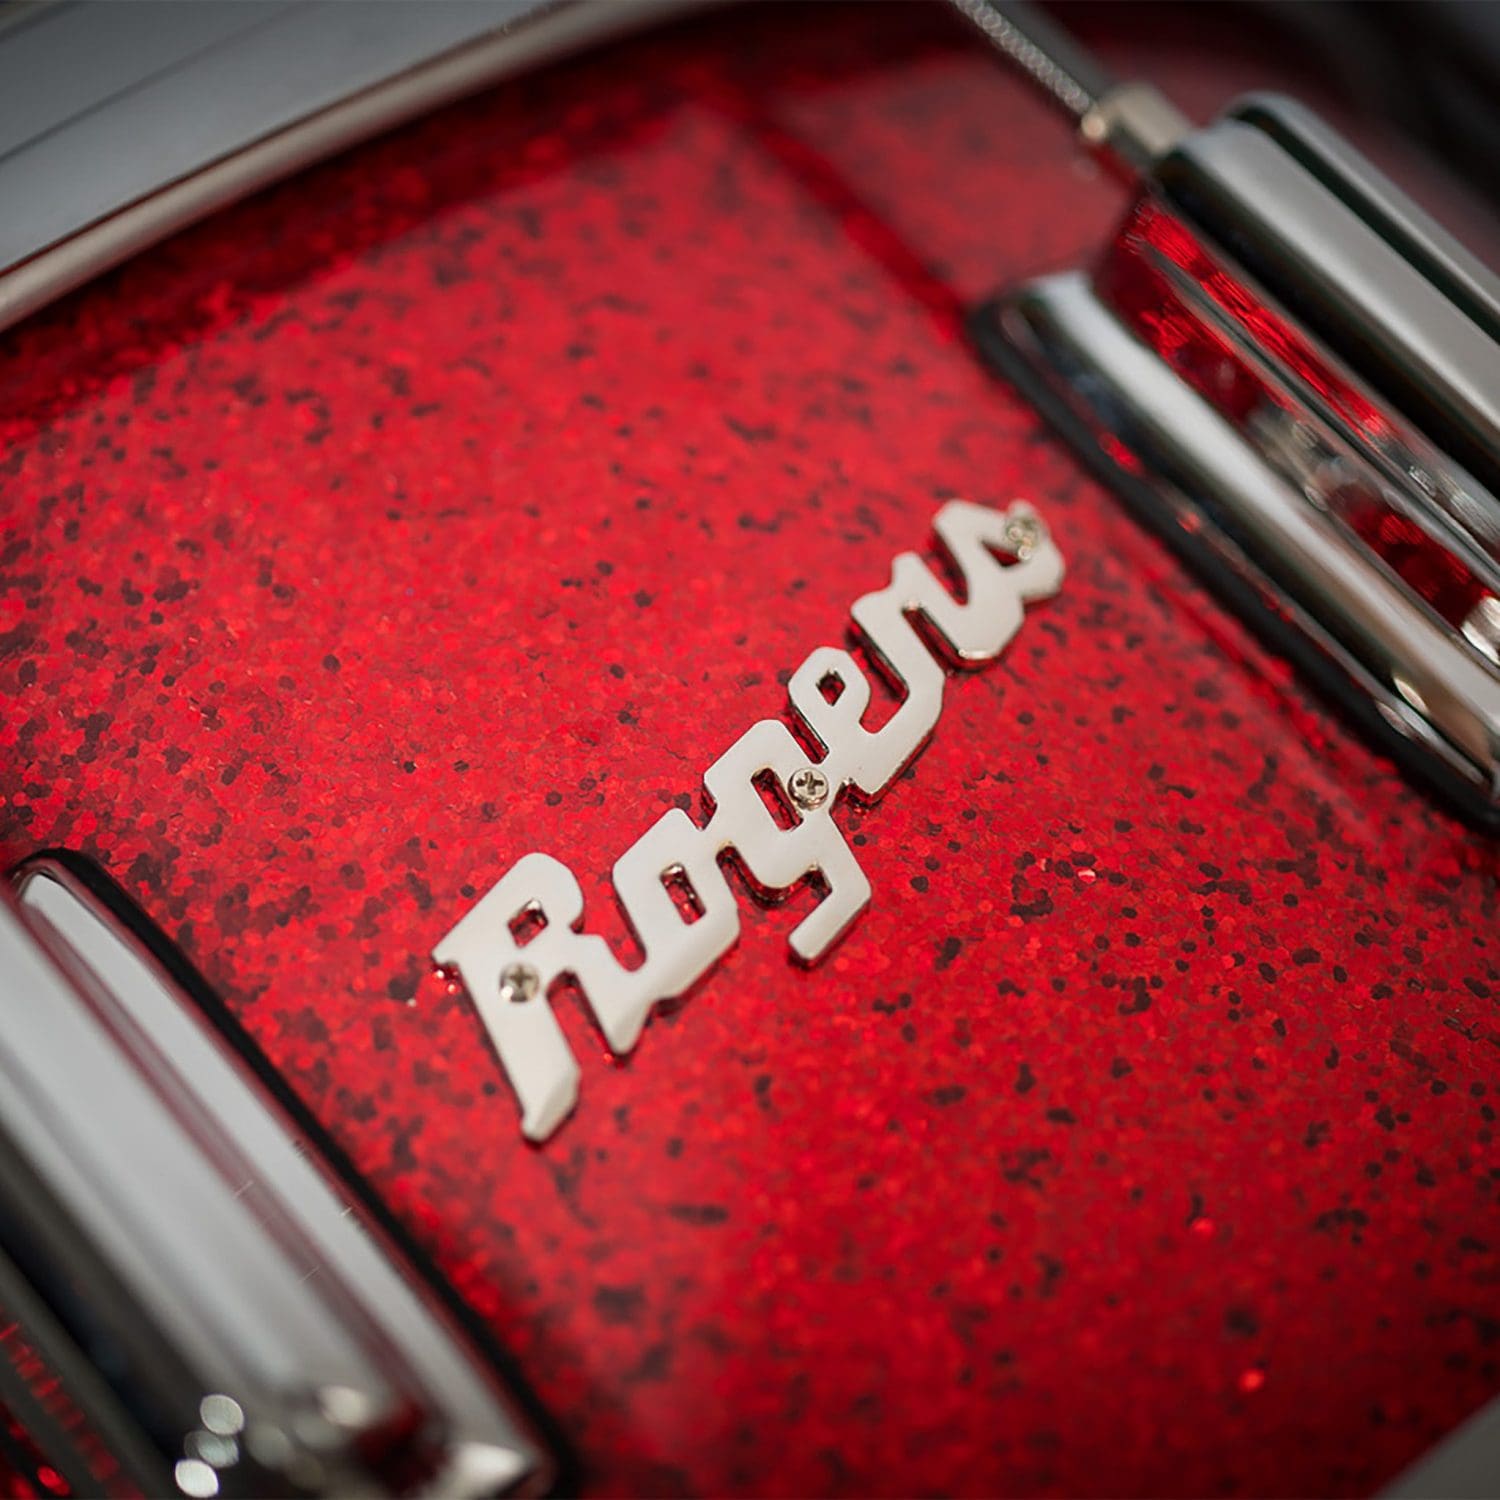 Red Sparkle Lacquer Dyna-Sonic Snare Drum